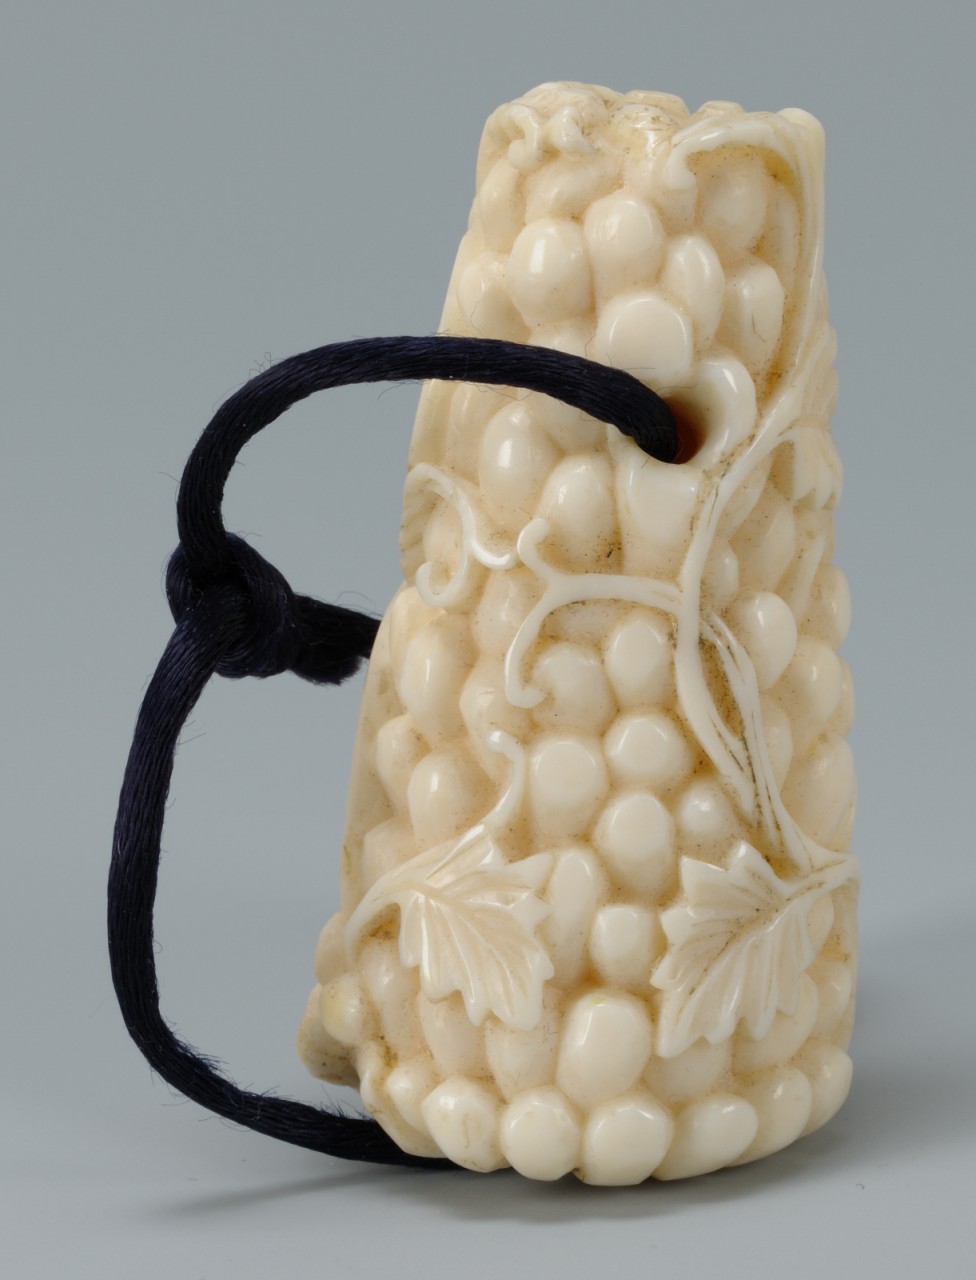 Lot 210: 2 Carved Asian Ivory Items